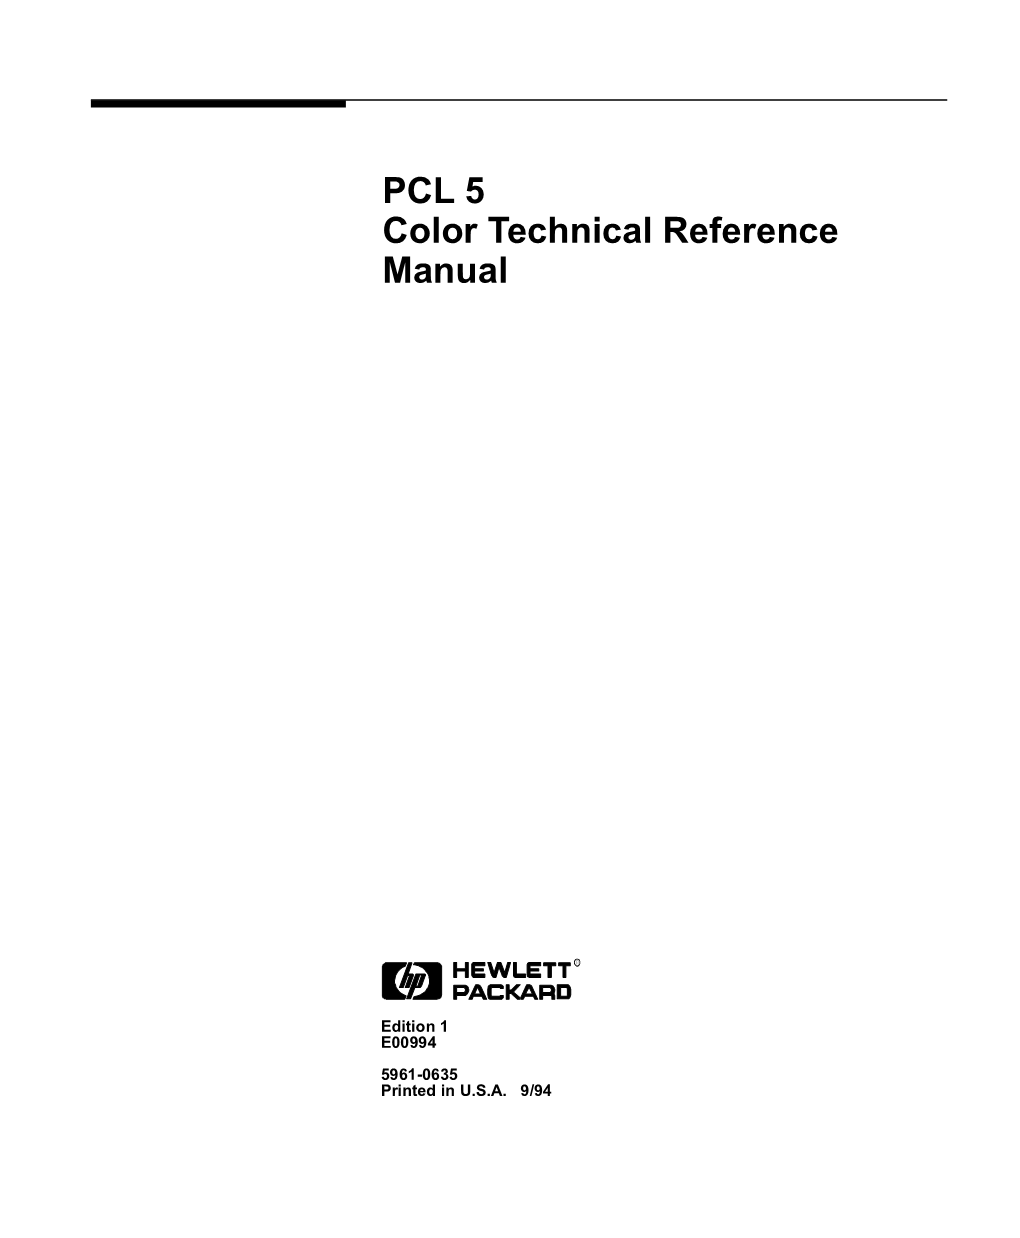 PCL 5 Color Technical Reference Manual